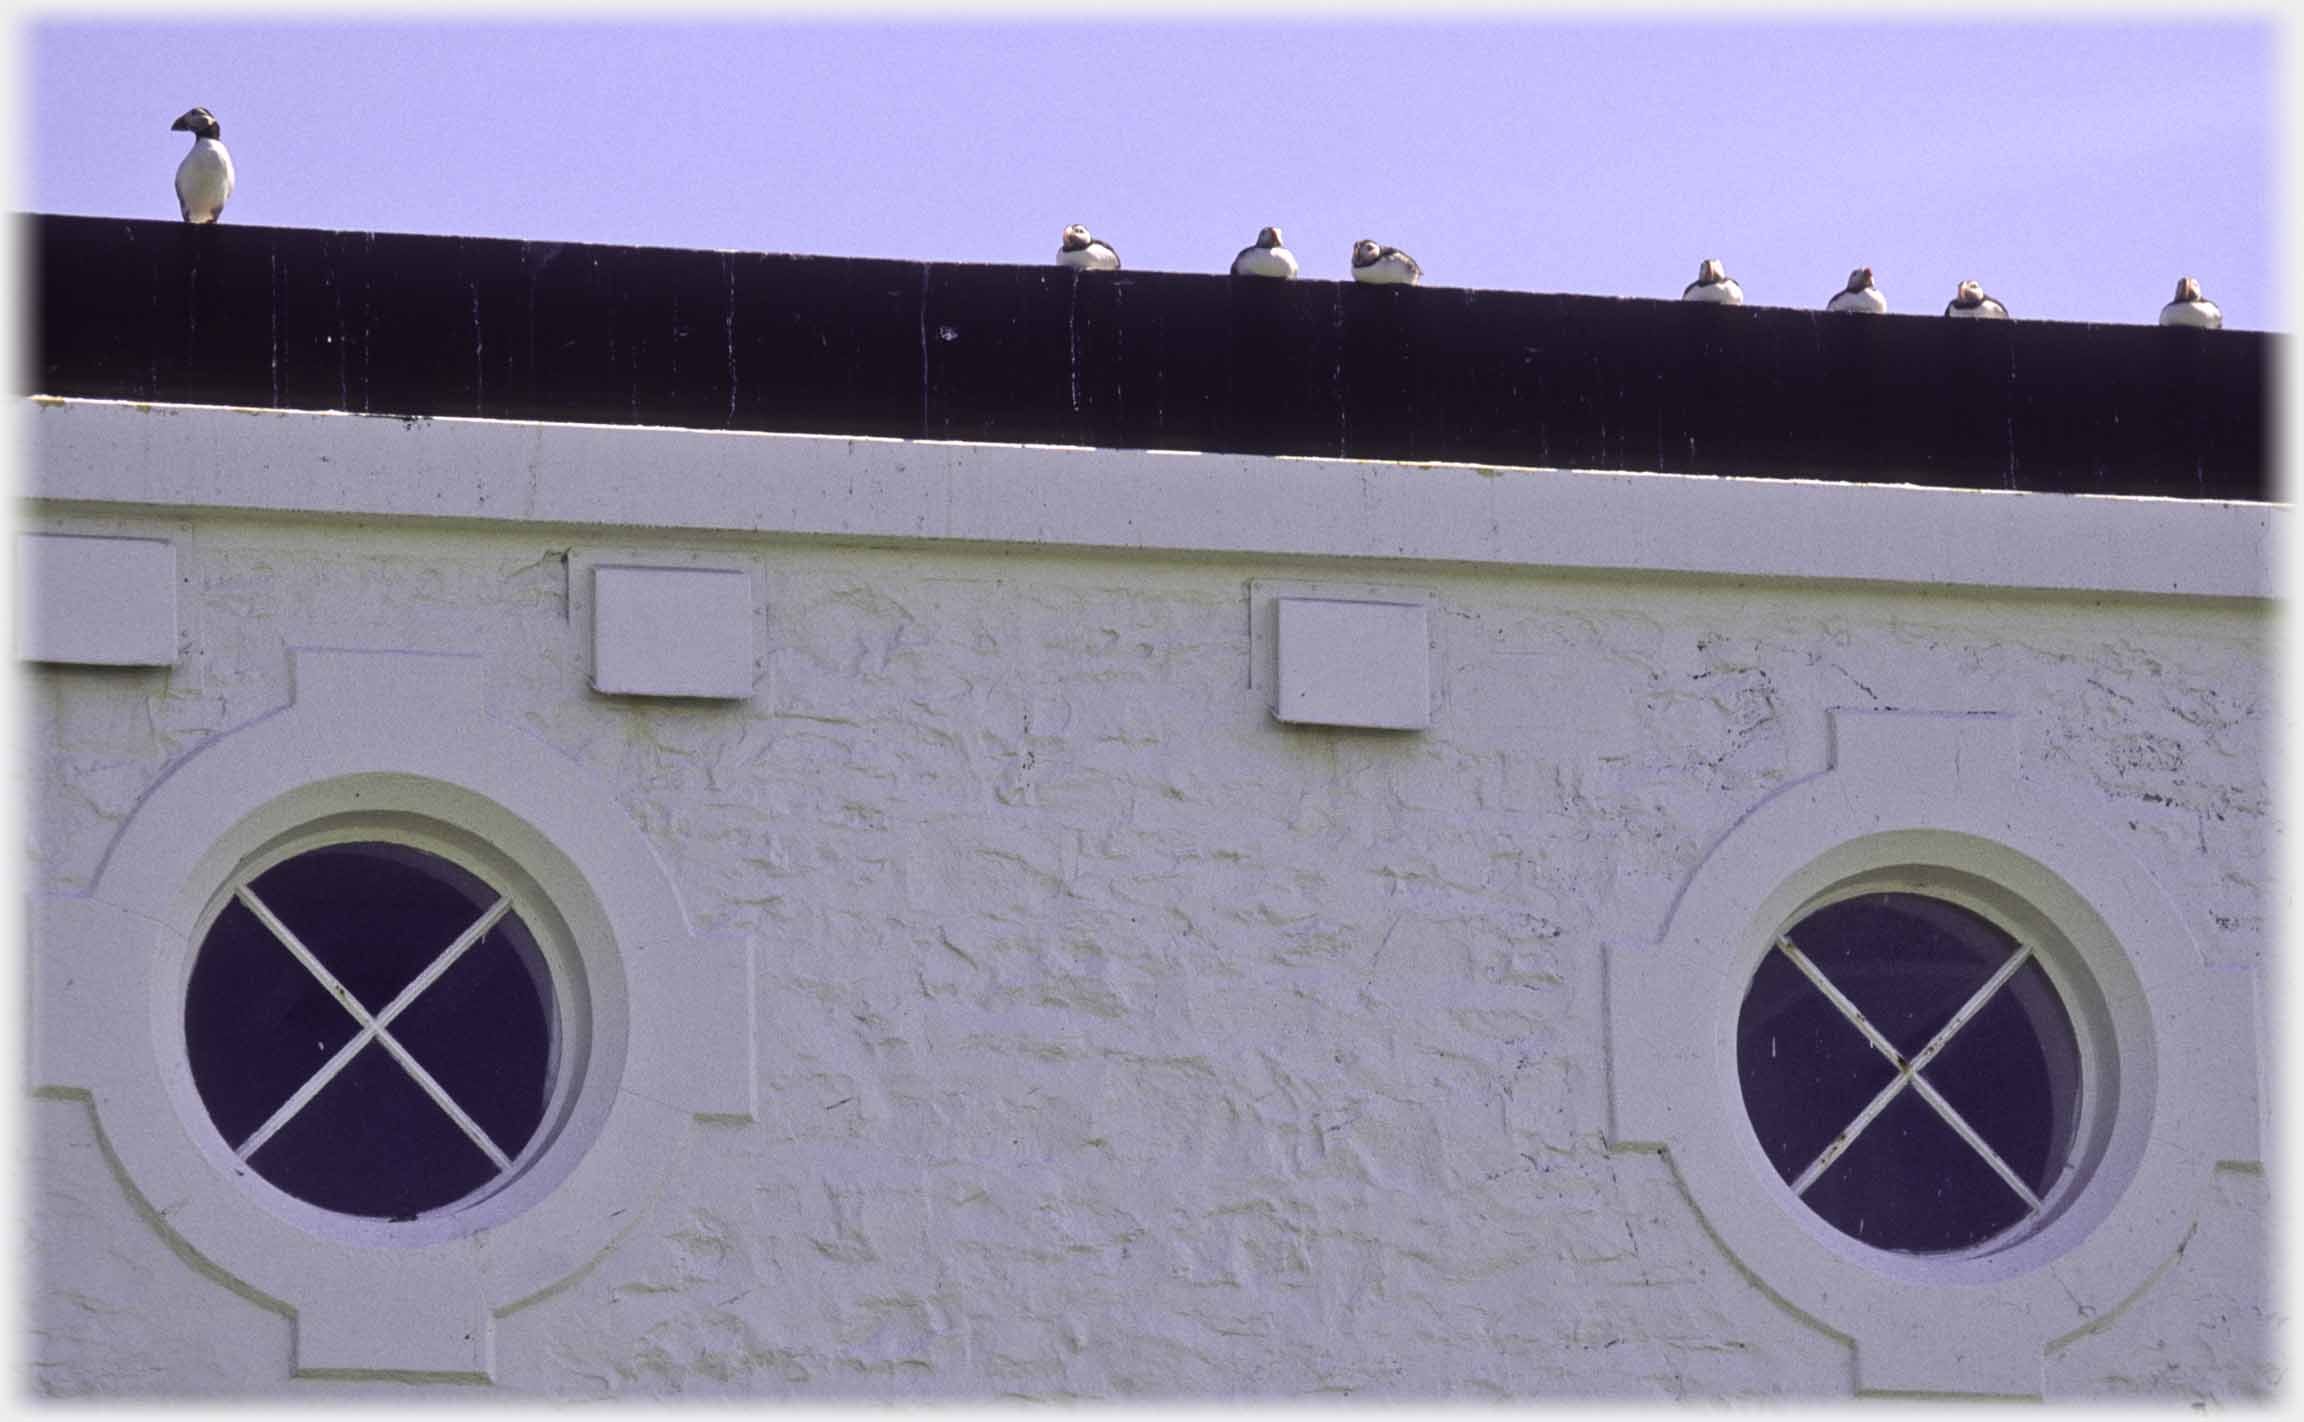 Building with two large round windows and line of puffins along the edge of the roof.